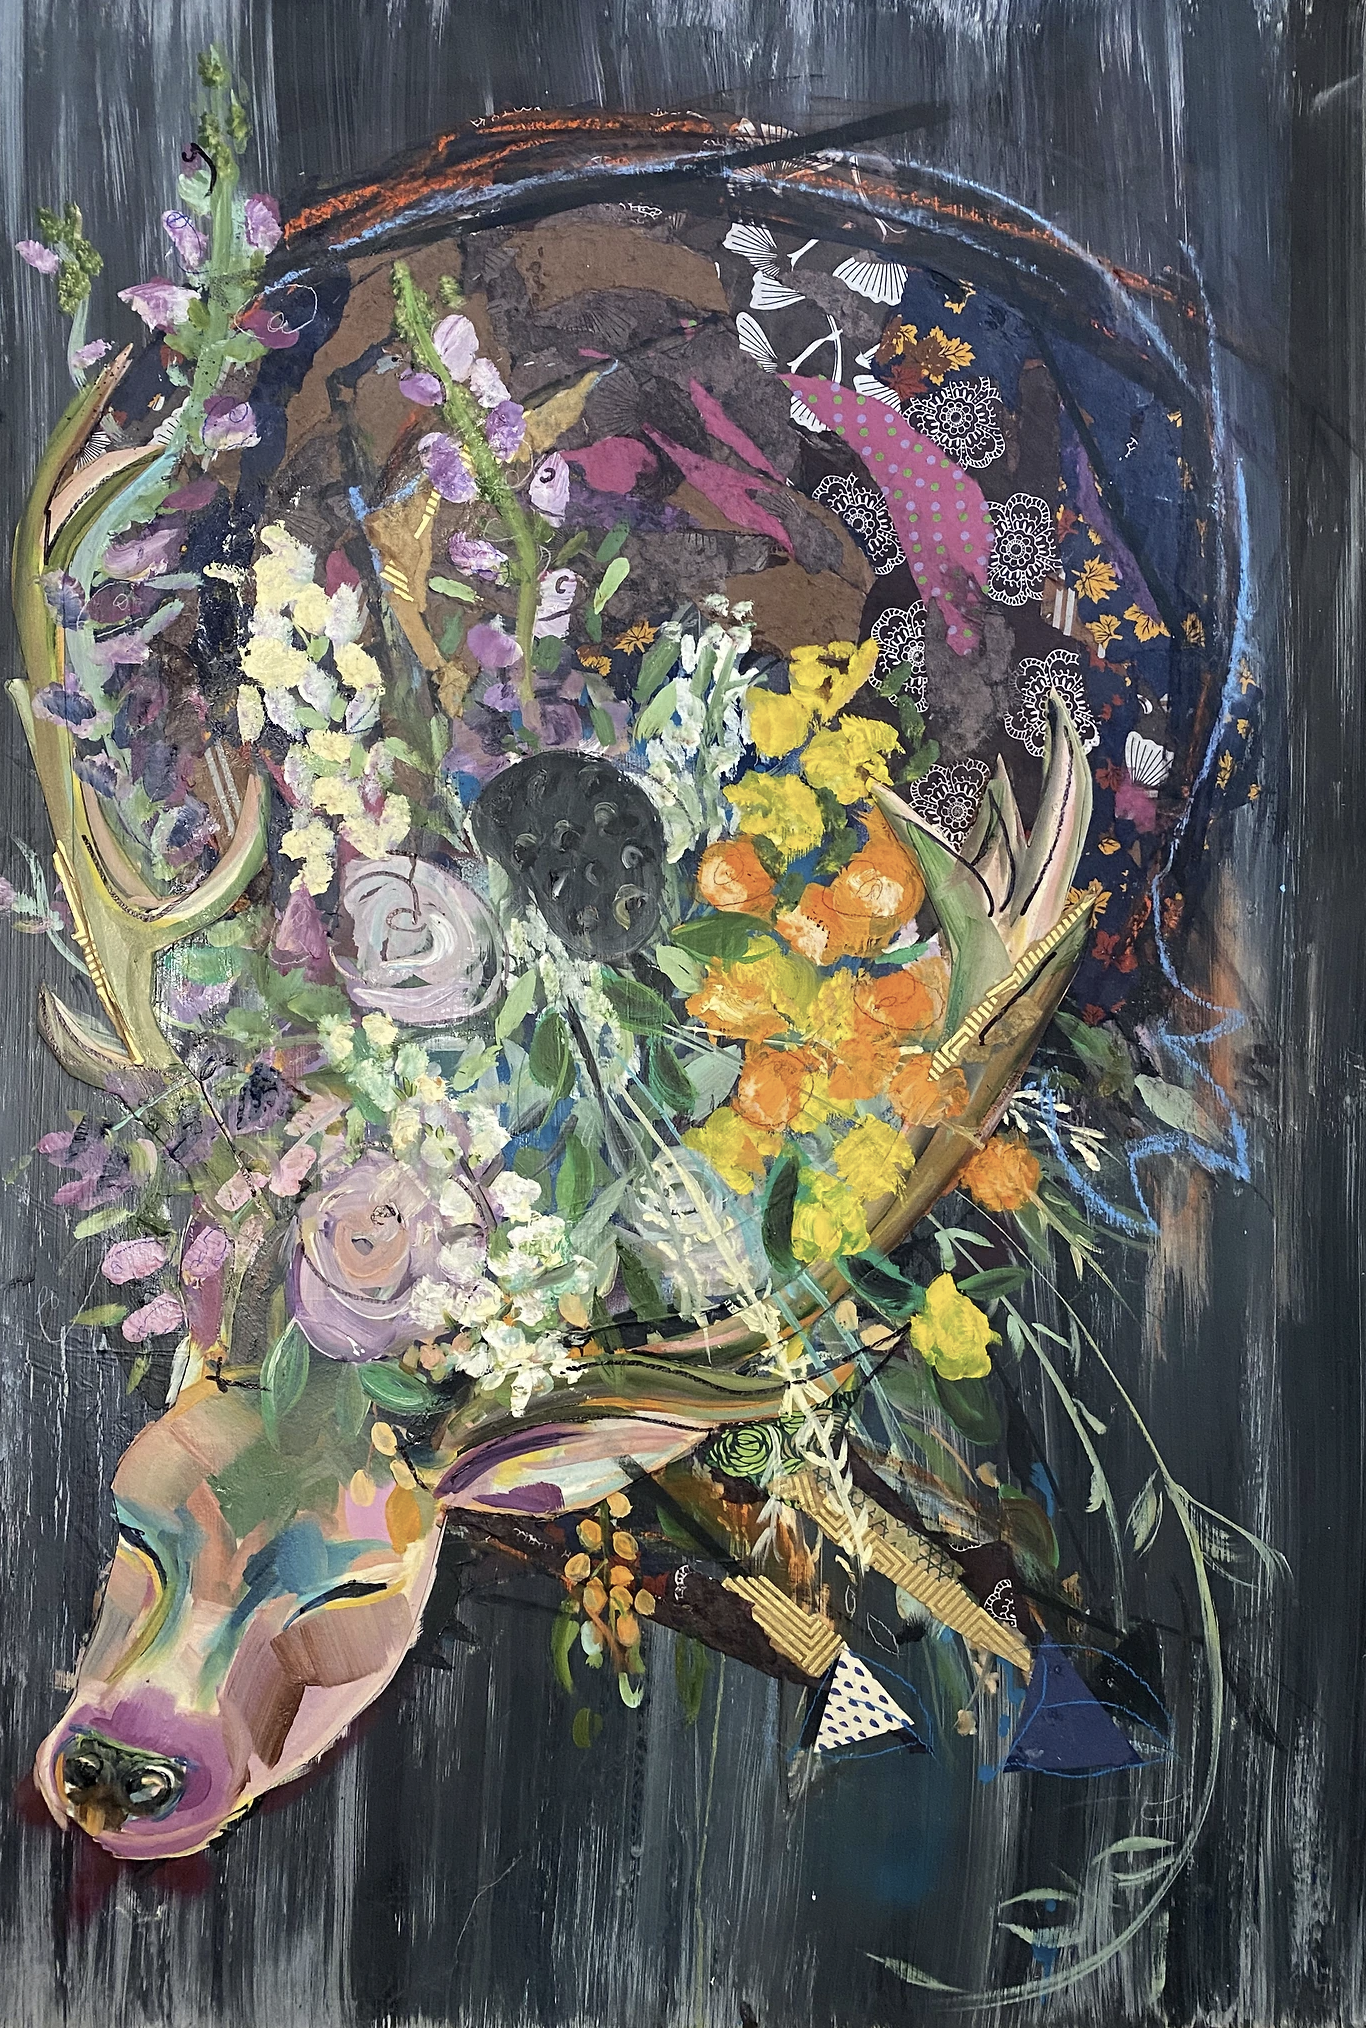 Fae Flowers 2021 (30"x44") Mixed media collage and oil on panel board.